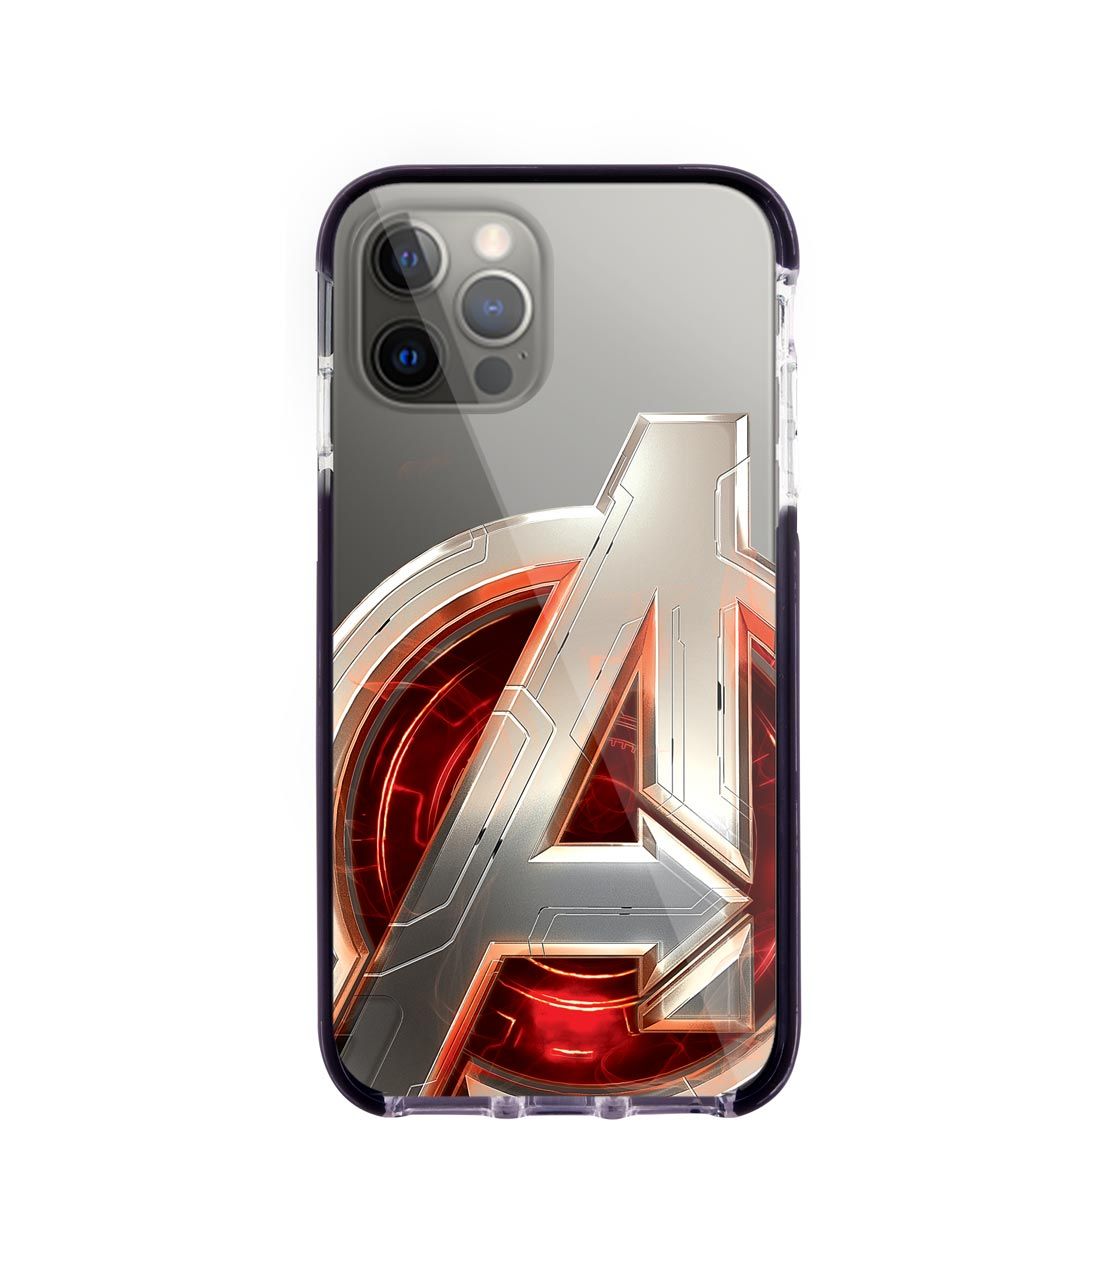 Avengers Version 2 - Extreme Case for iPhone 12 Pro Max